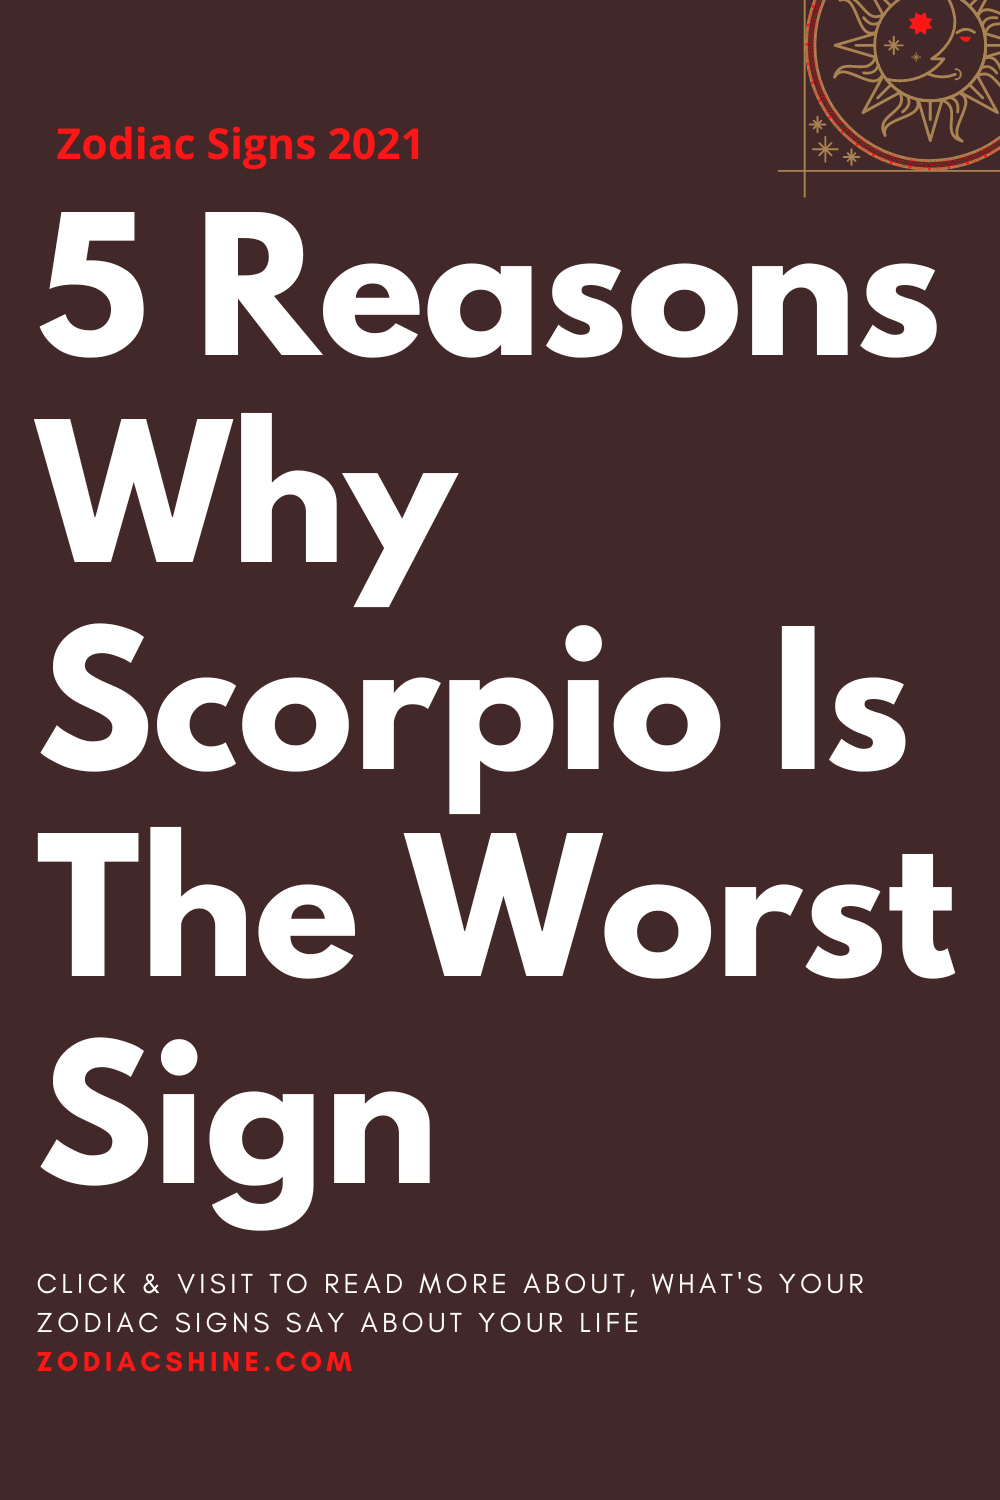 5 Reasons Why Scorpio Is The Worst Sign